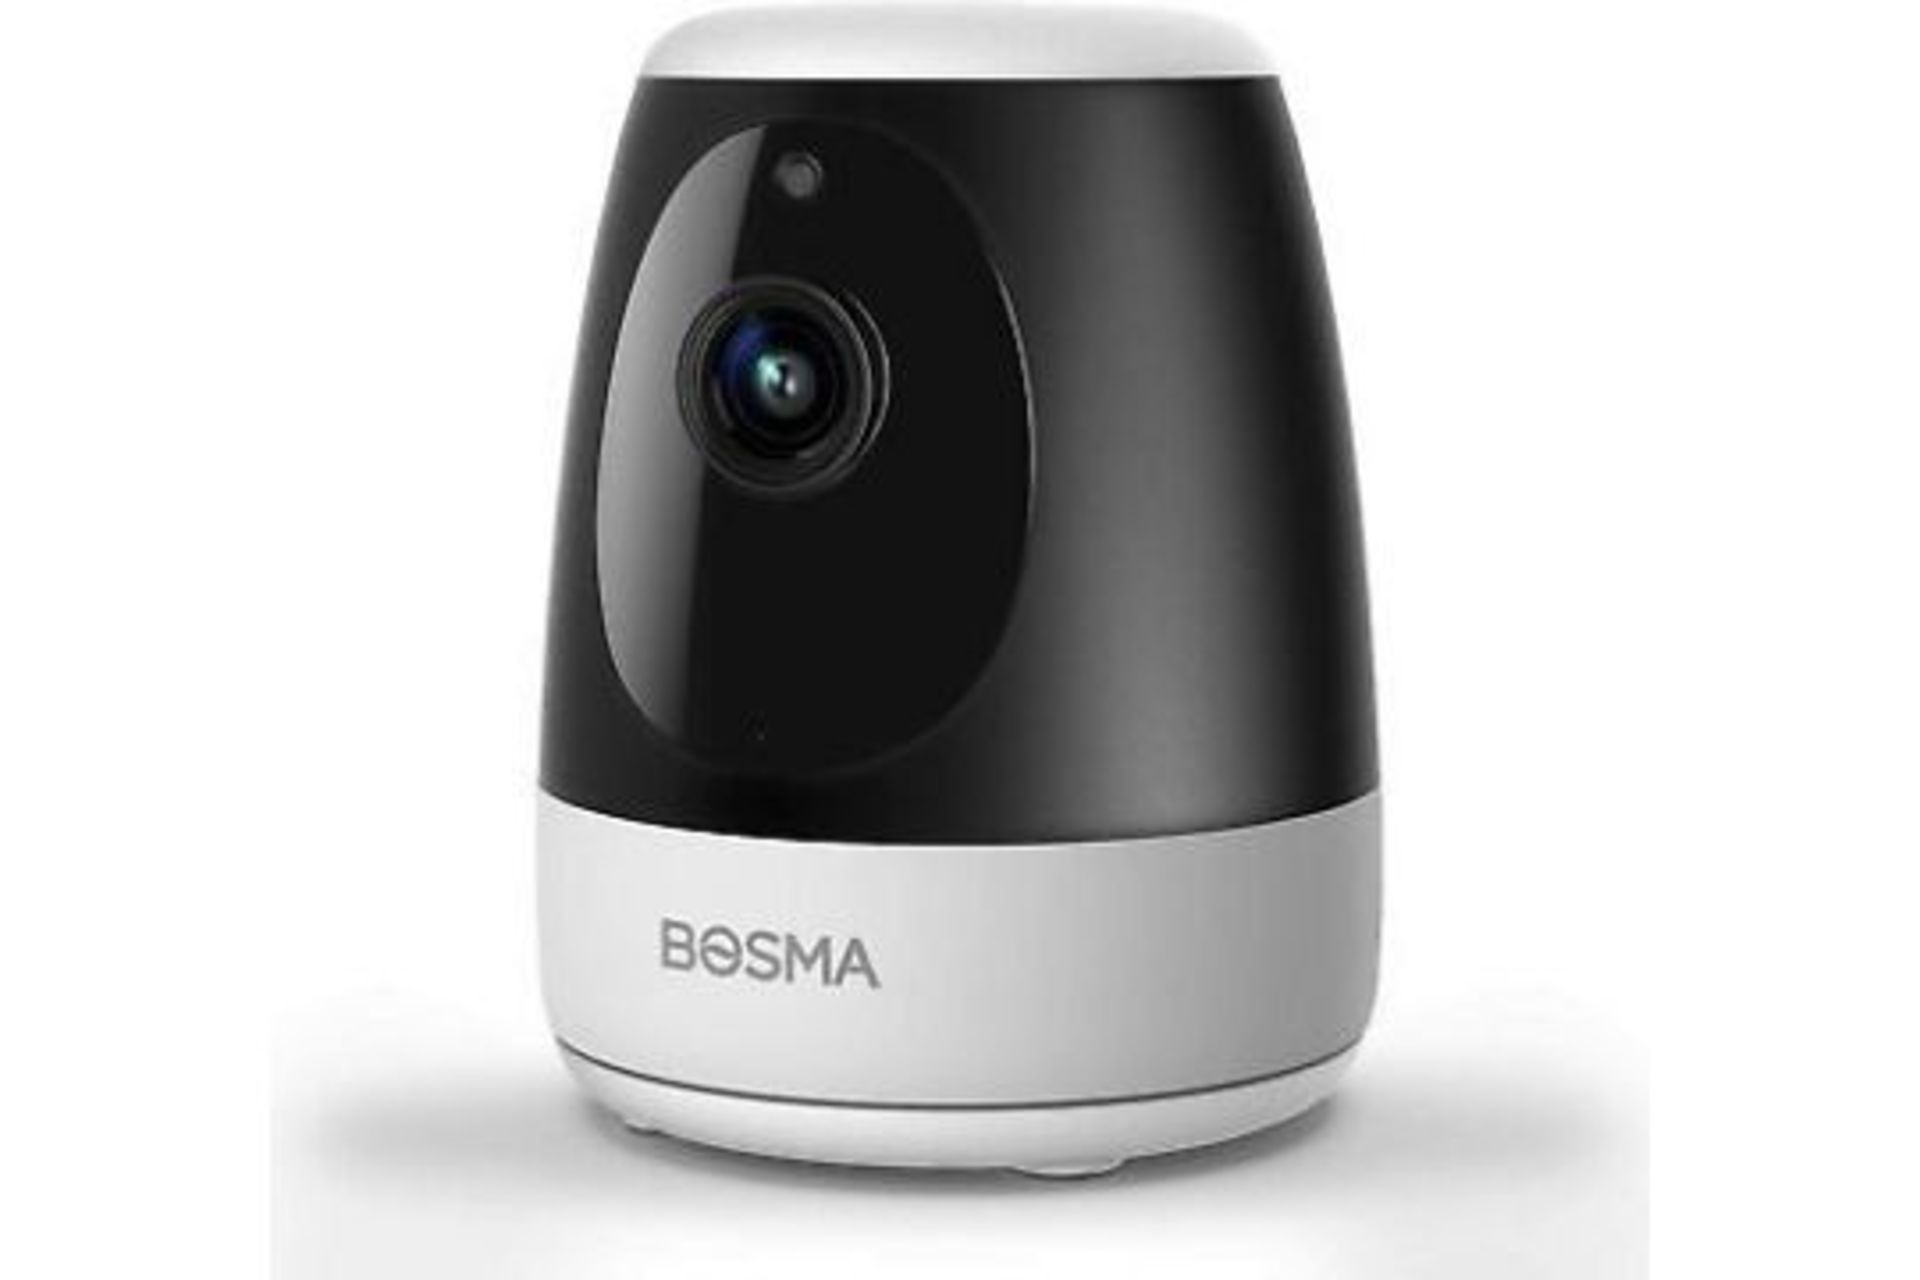 2 X BRAND NEW BOSMA SMART HOME SECURITY CAMERA INDOOR, BOSMA WITH 1080P FHD NIGHT VISION, PAN 360